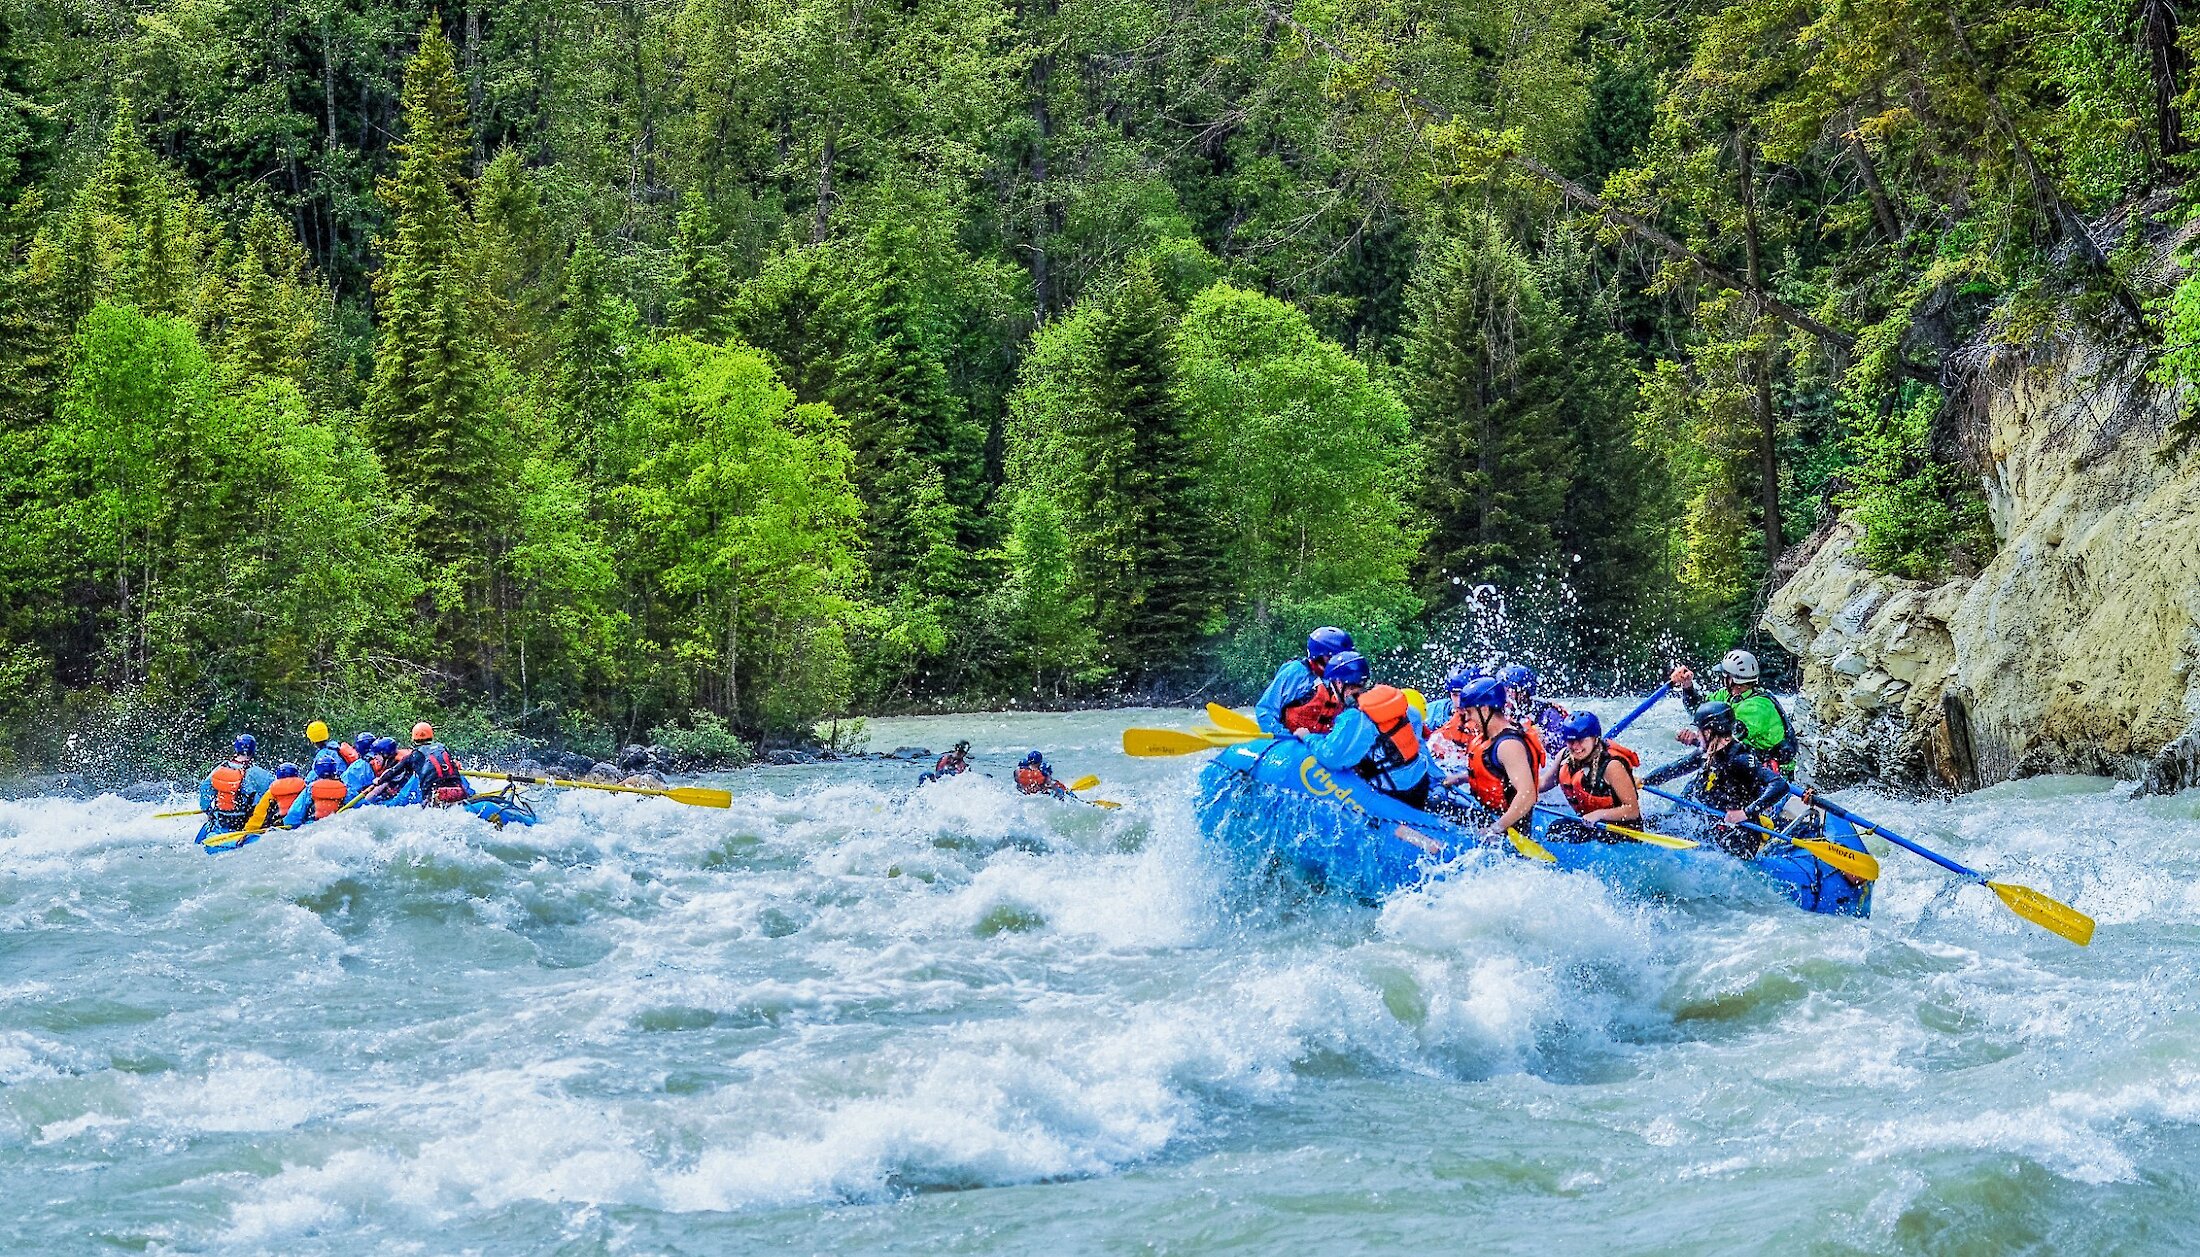 Riding the rapids on the Kicking Horse River